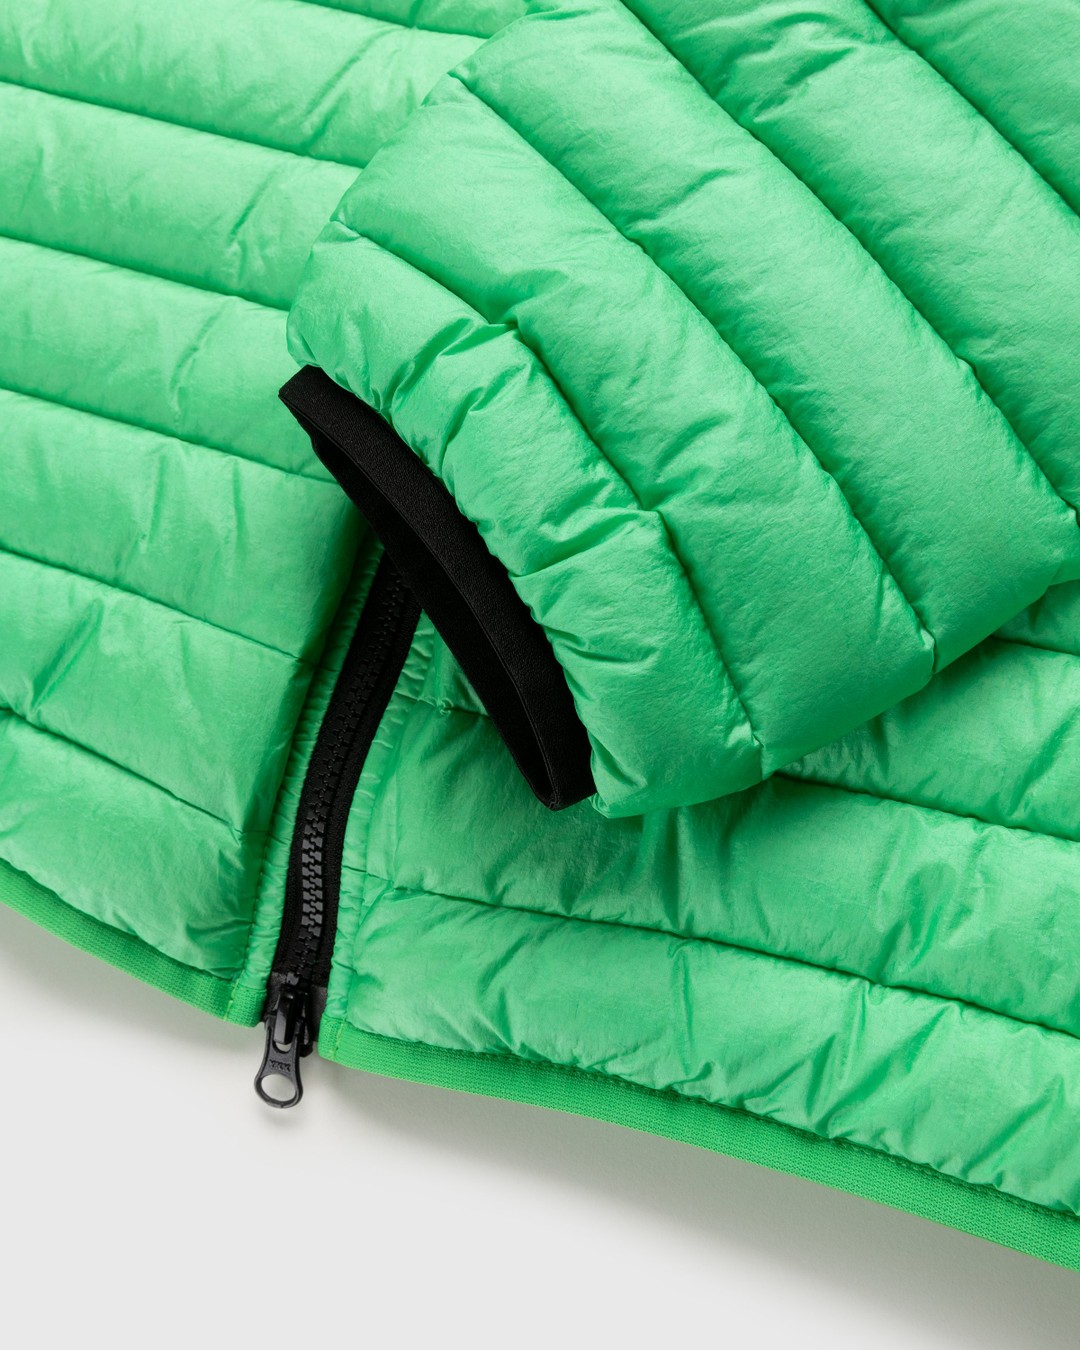 Stone Island – Packable Down Jacket Light Green - Outerwear - Green - Image 3